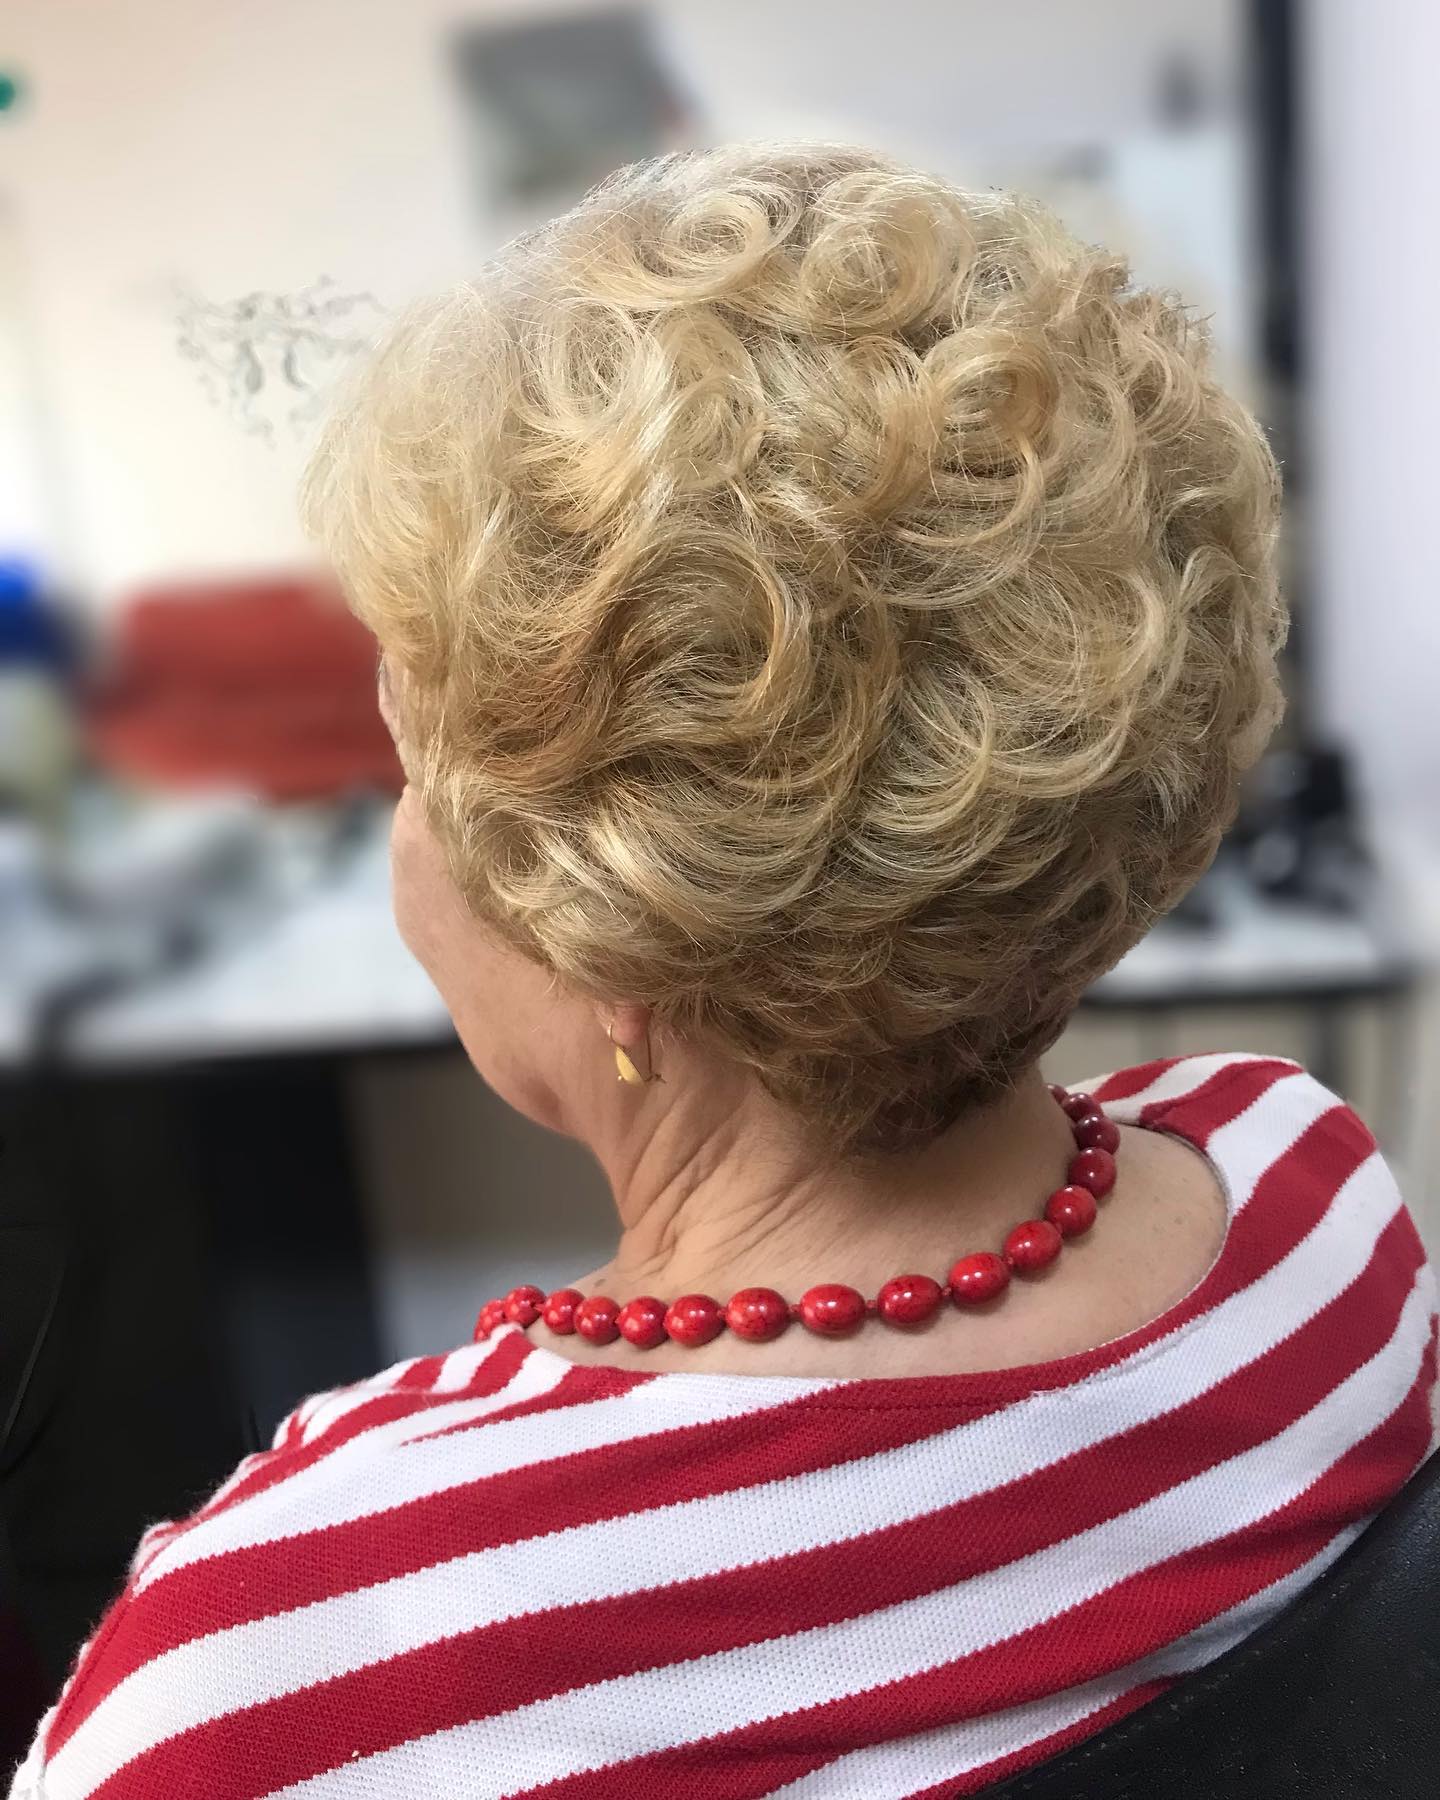 Hairstyles for Women Over 70 22 Hairstyles for over 70 with fine hair | Hairstyles for over 70 with glasses | Medium length hairstyles for women over 70 Hairstyles for Women over 70